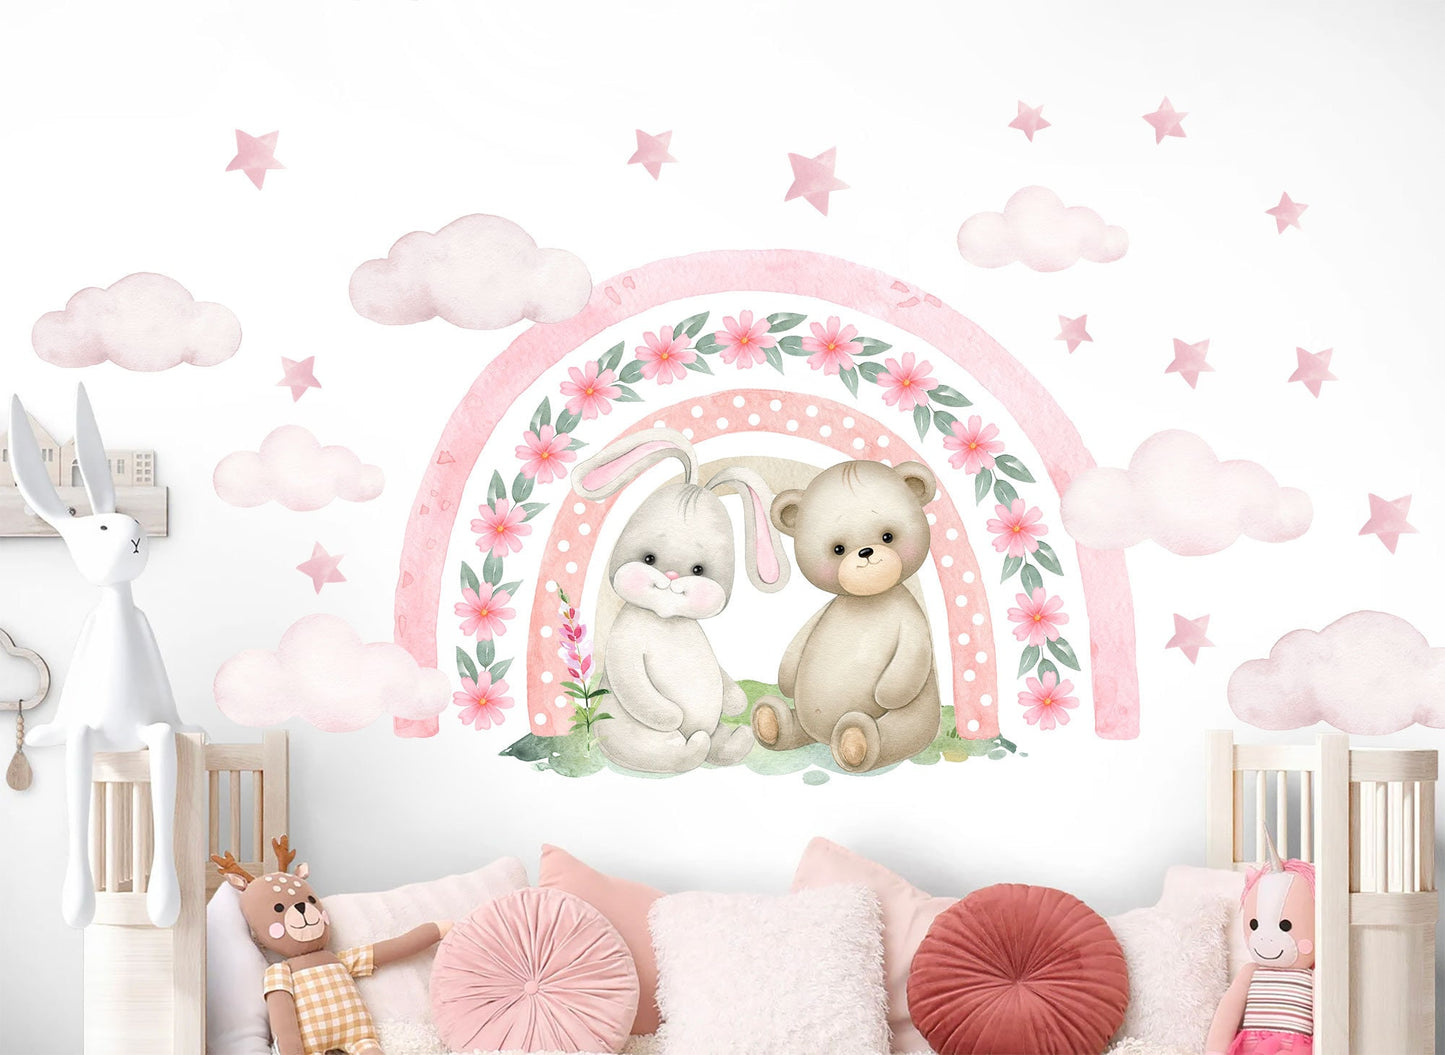 Rabbit and bear sit under a Flora Rainbow Wall Decal - Pink stars and clouds - Girls' Room Decor - BR337